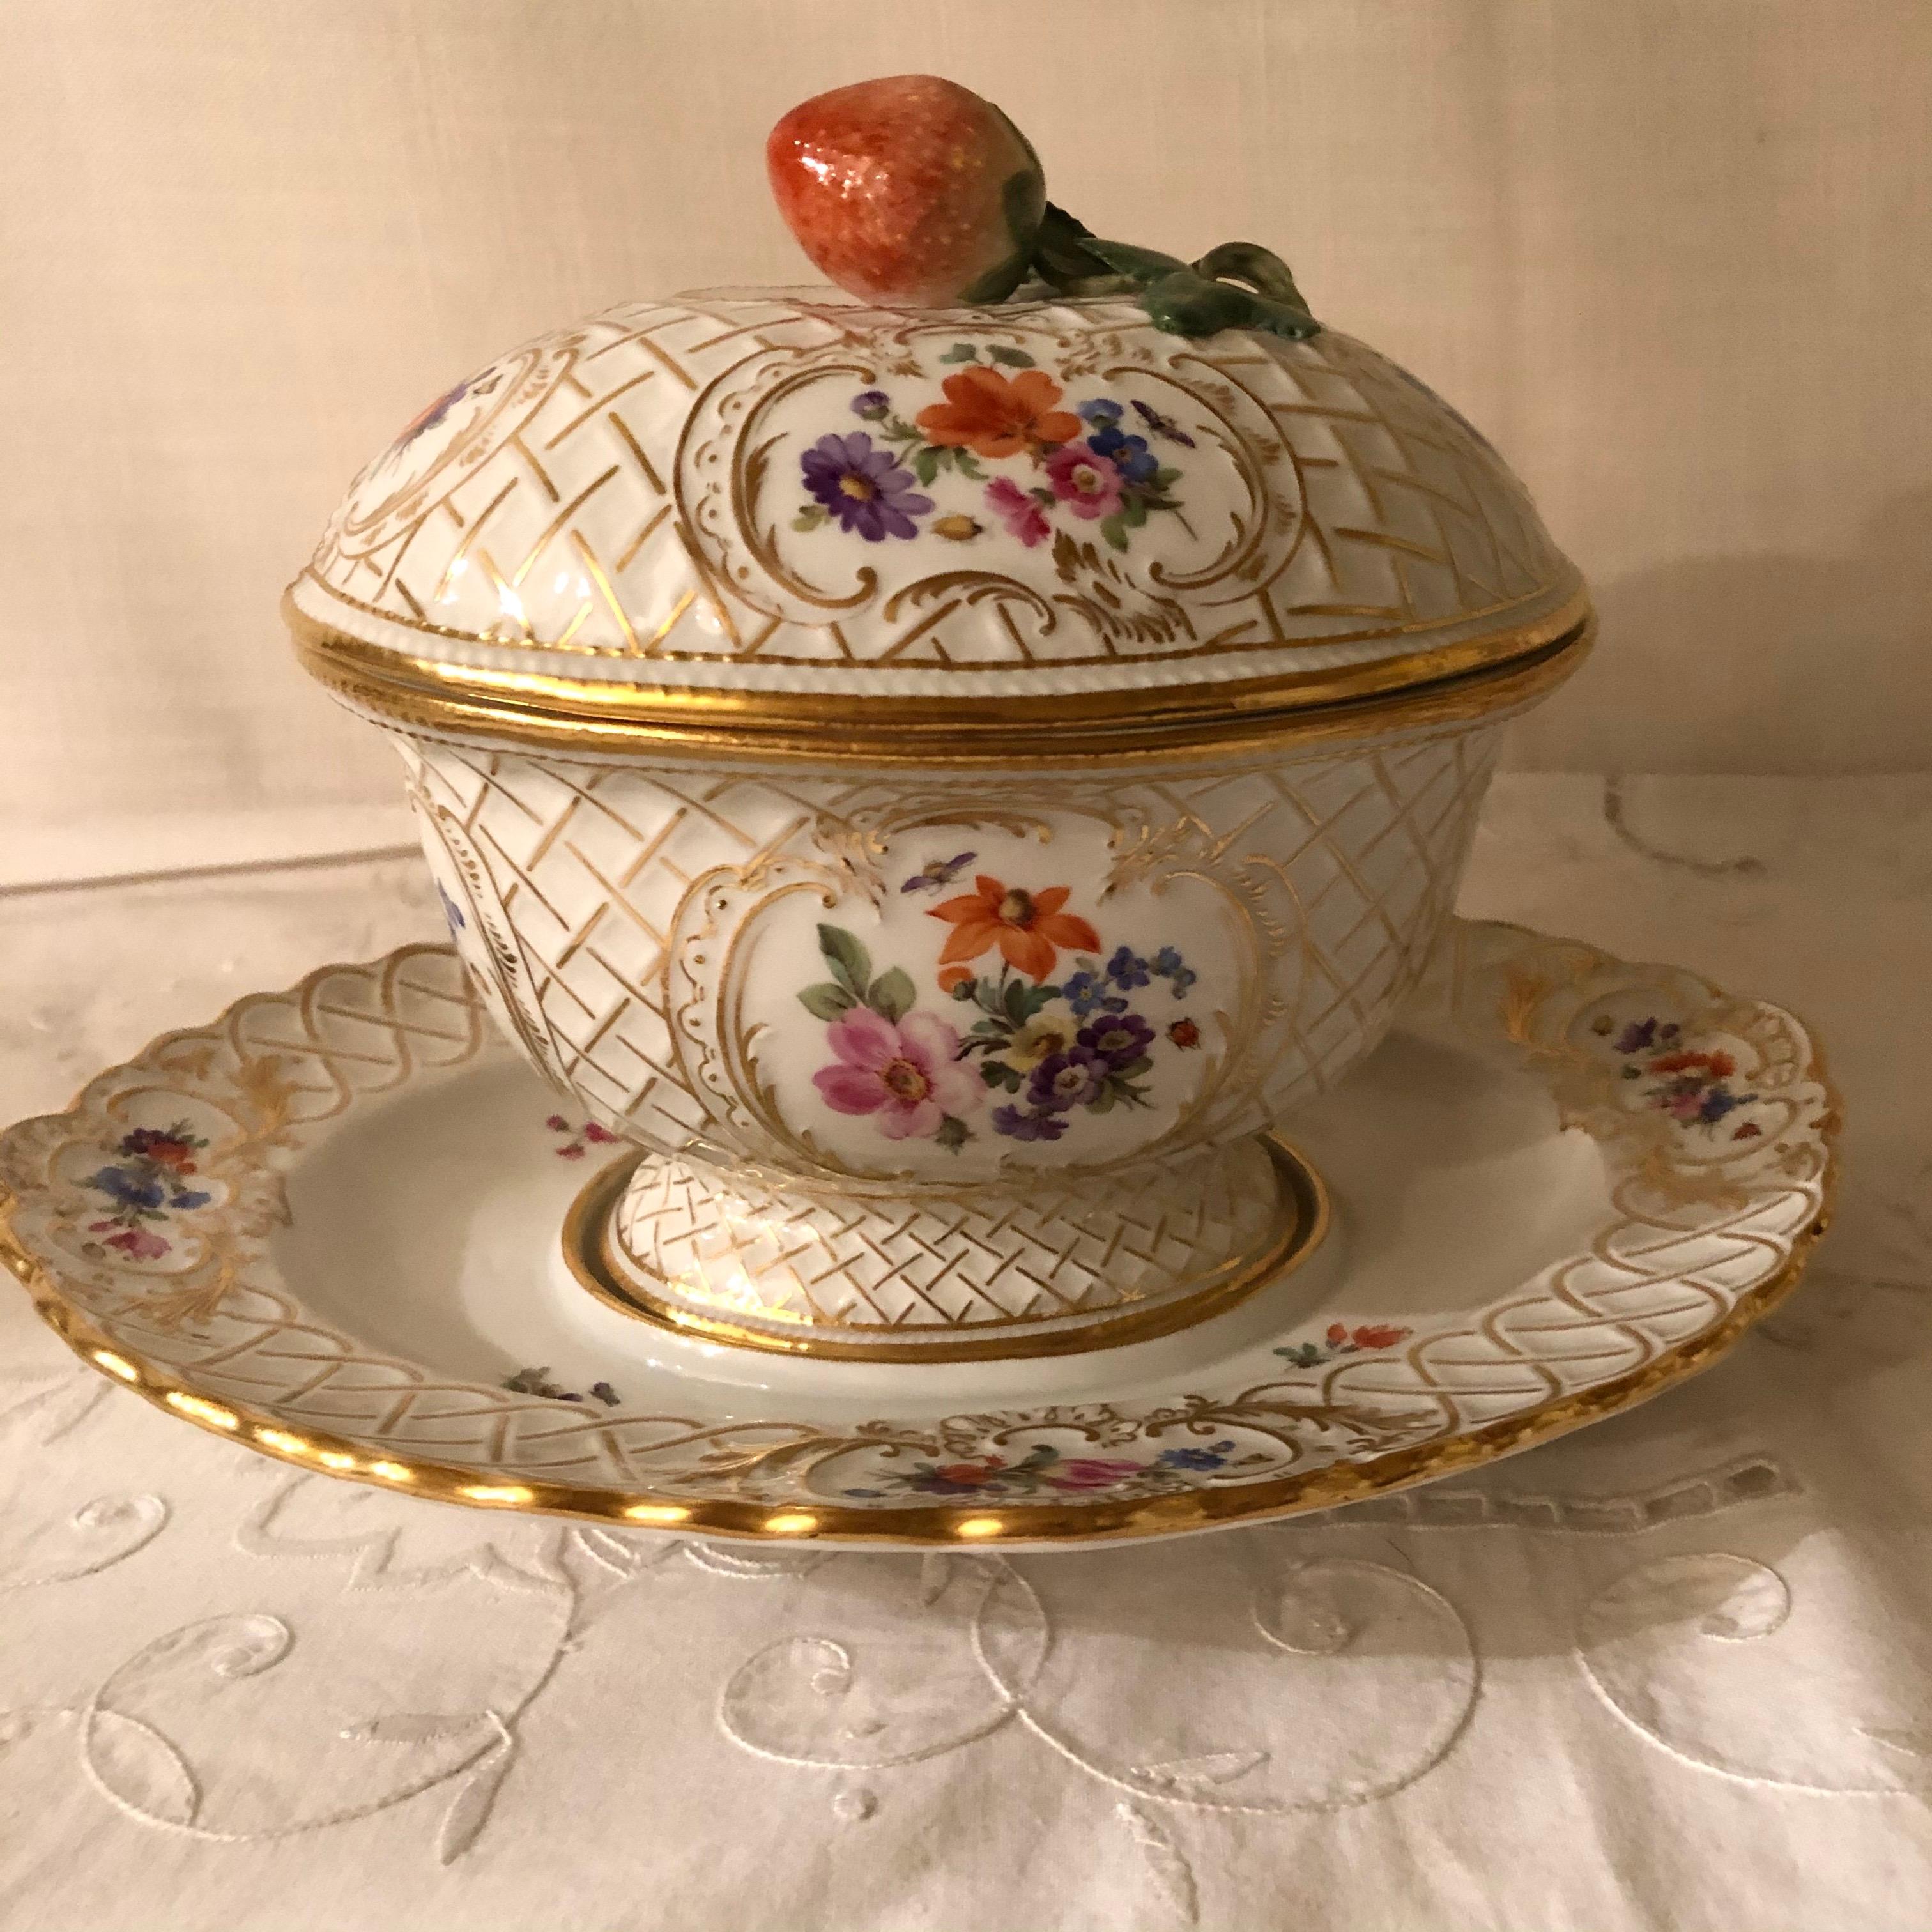 This is a very rare and beautiful Meissen gravy or saucier with a raised strawberry decoration on the cover. The bottom has an attached underplate, and is painted with four cartouches of flower bouquets. The top of the gravy also has four cartouches